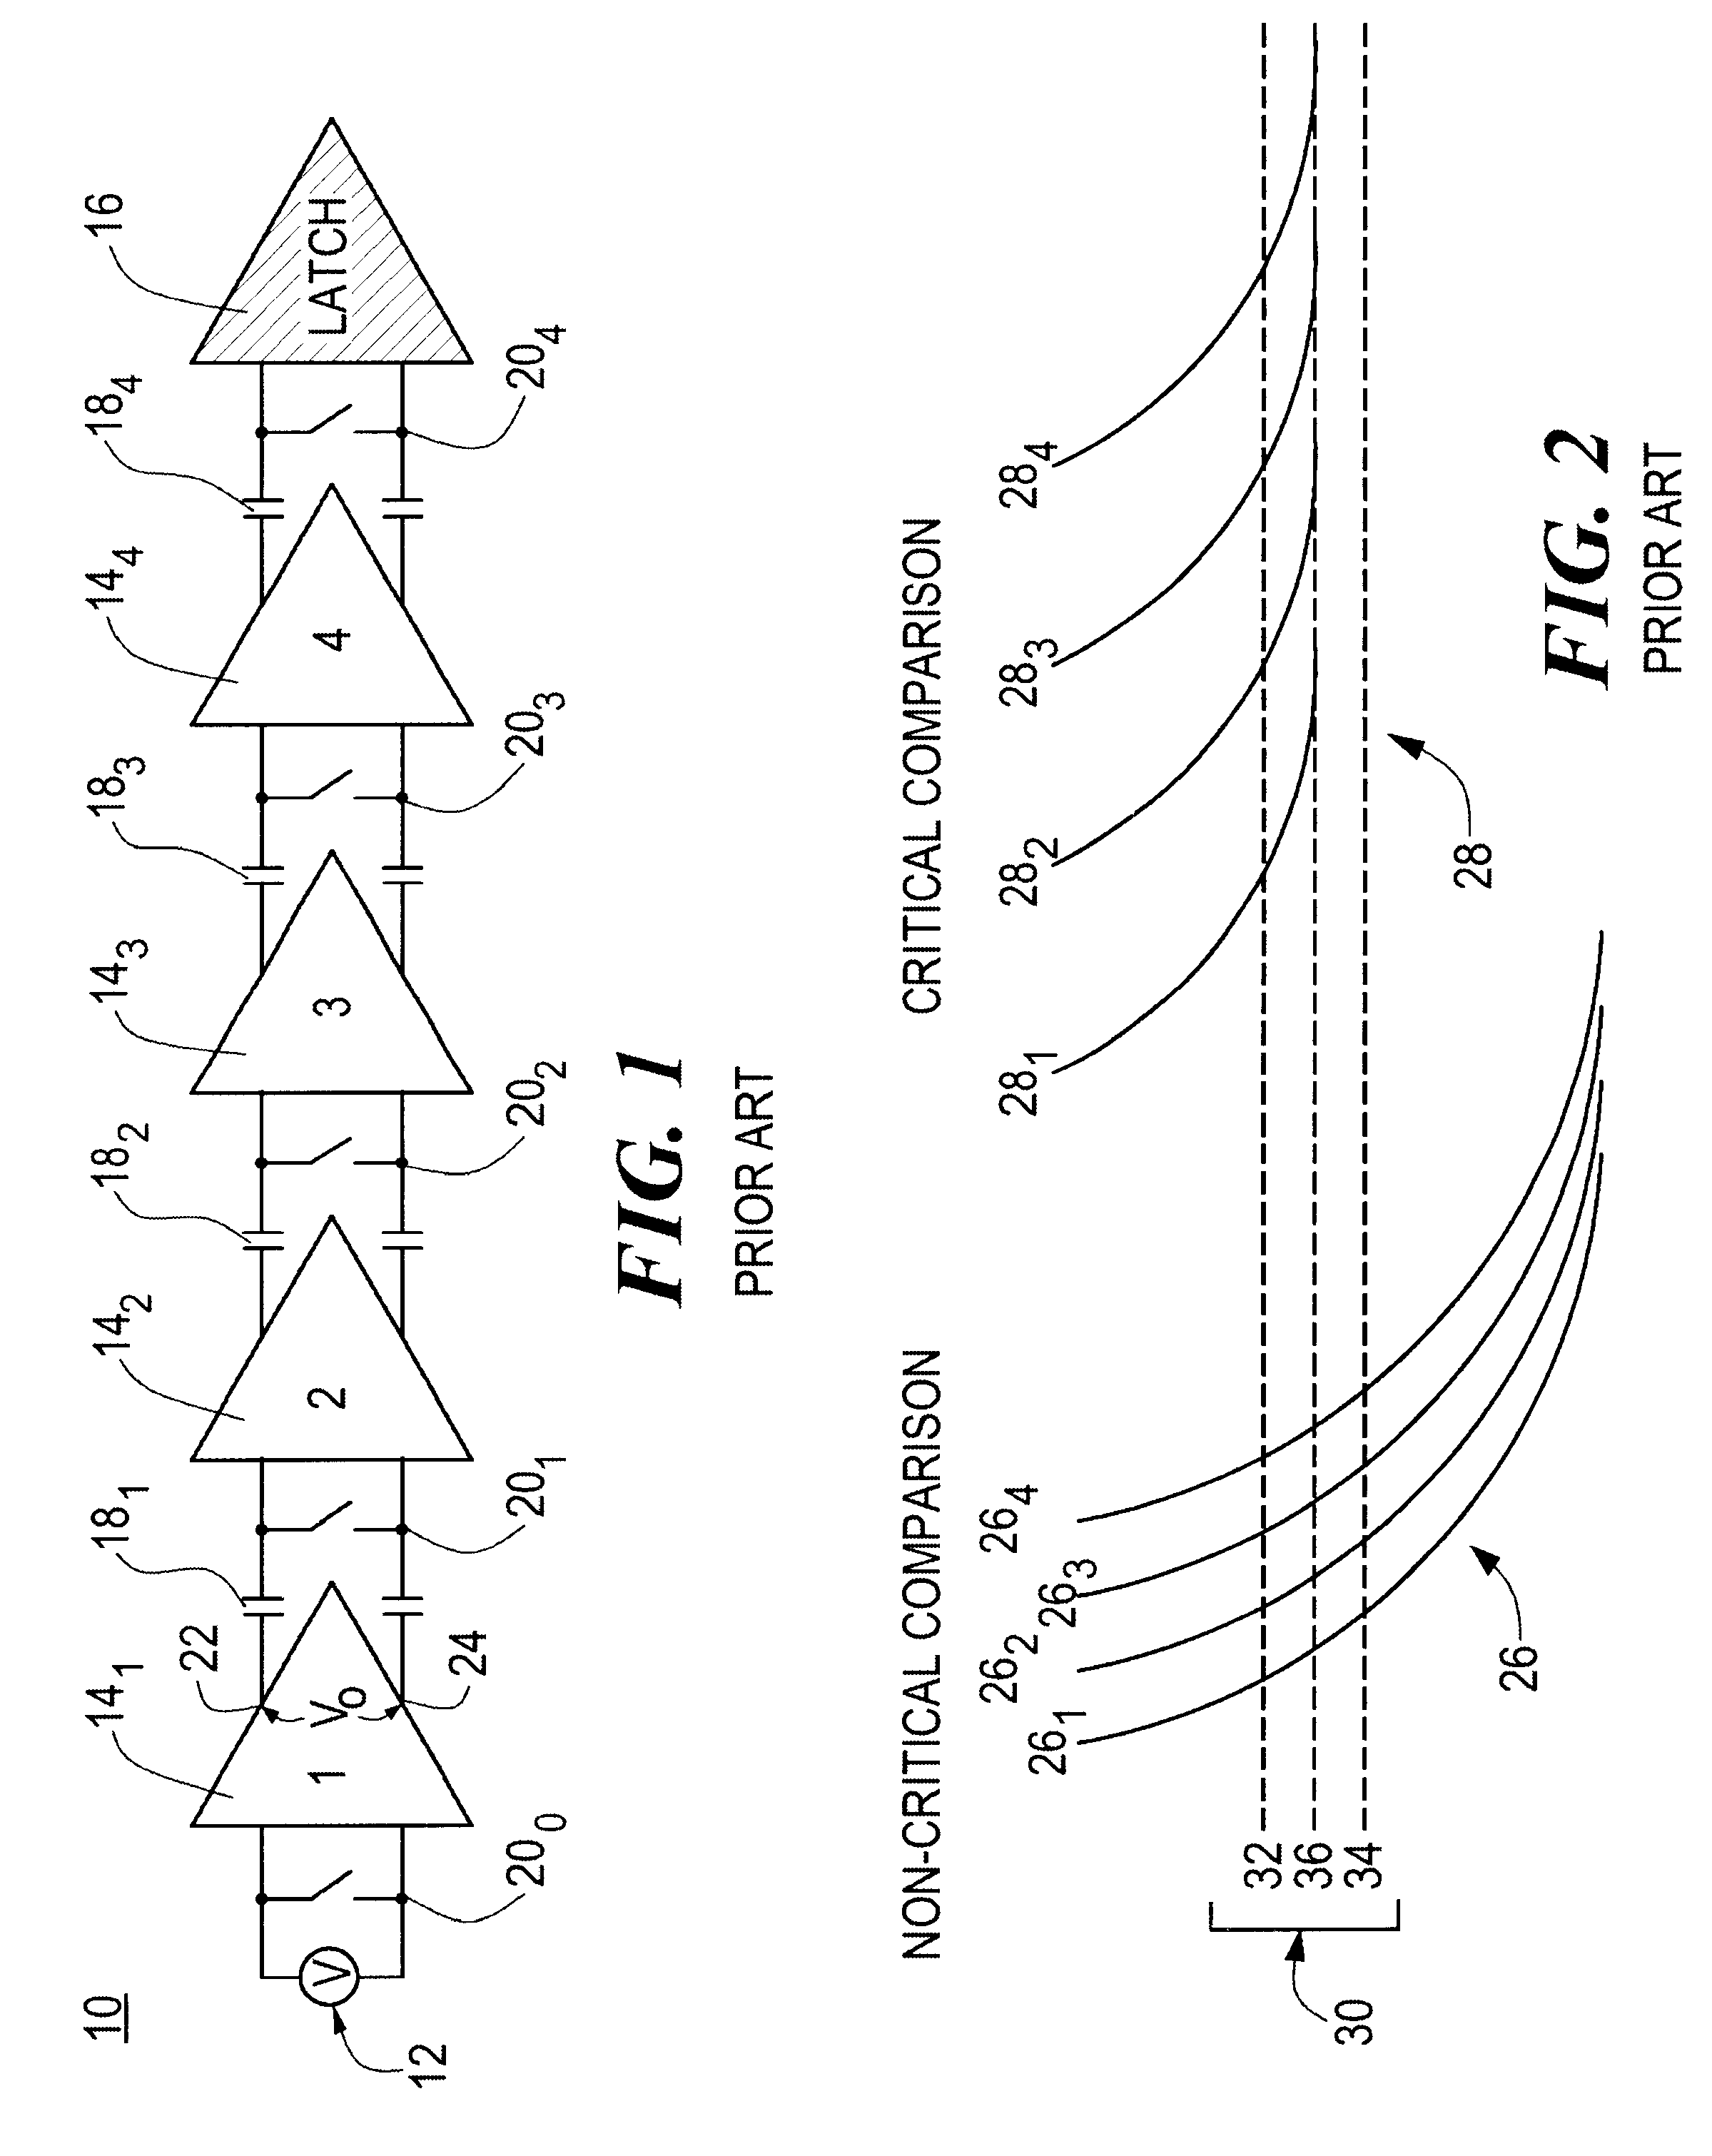 Multi-stage, low-offset, fast-recovery, comparator system and method